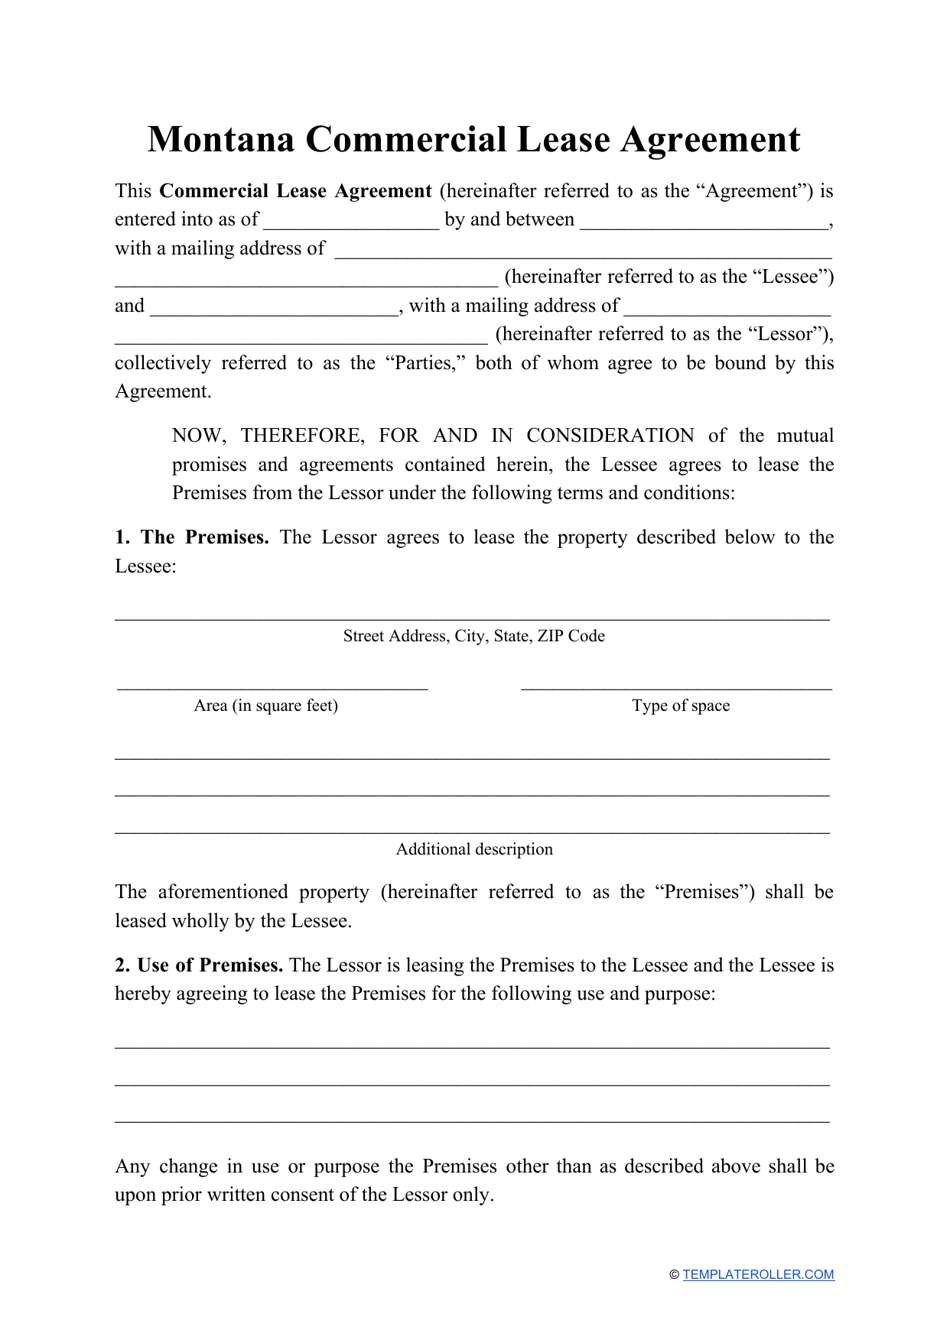 Commercial Lease Agreement Template - Montana, Page 1